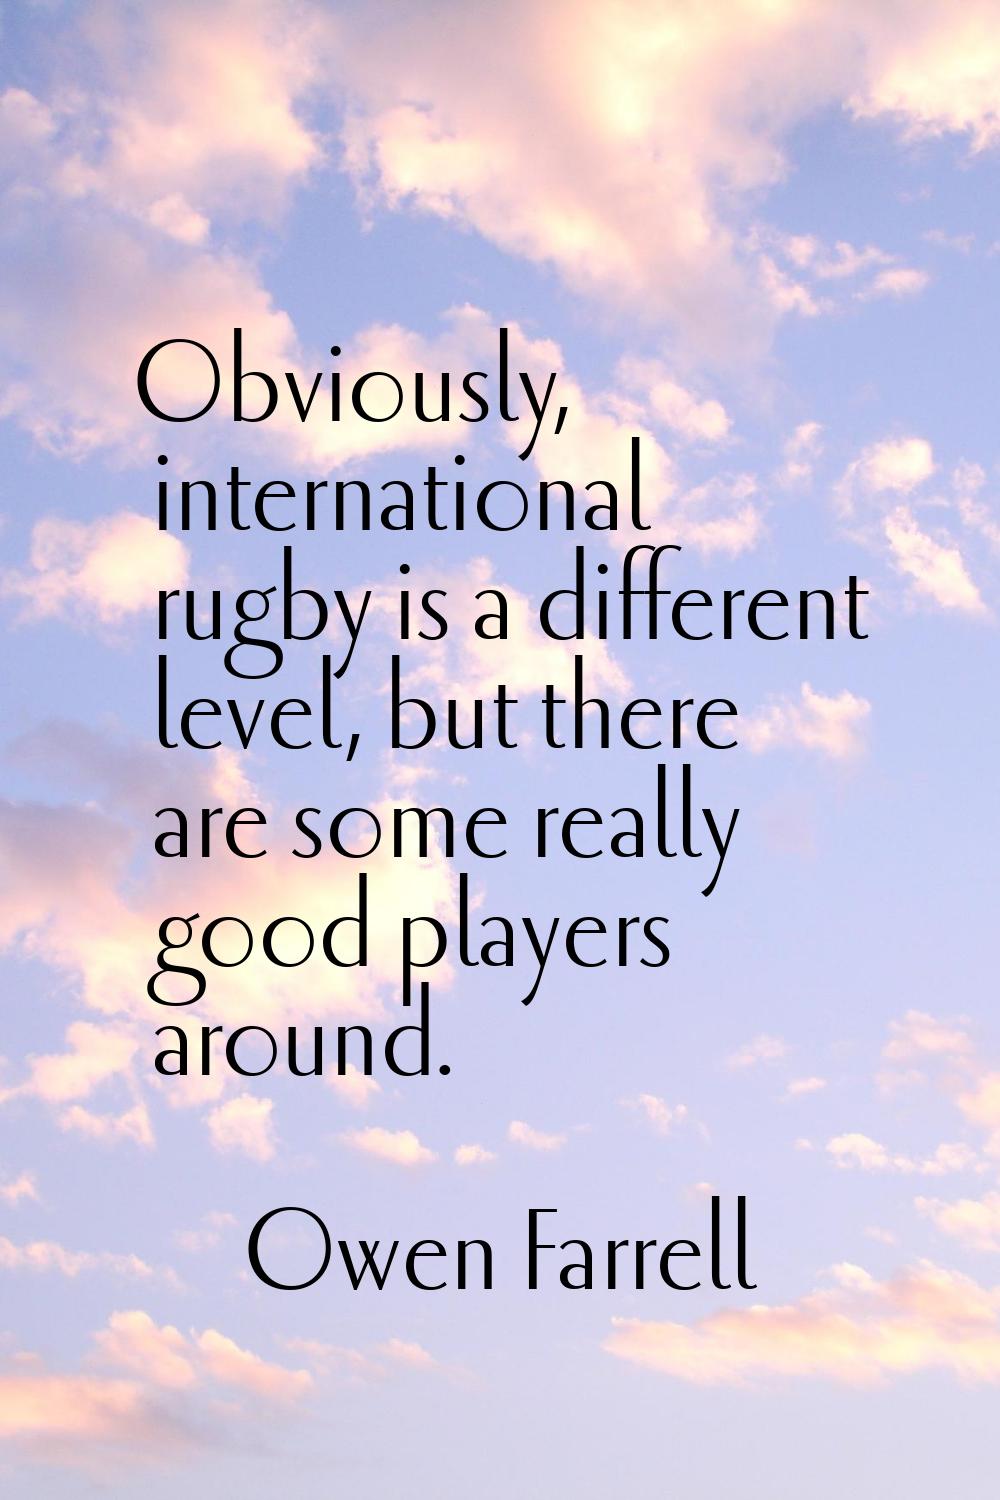 Obviously, international rugby is a different level, but there are some really good players around.